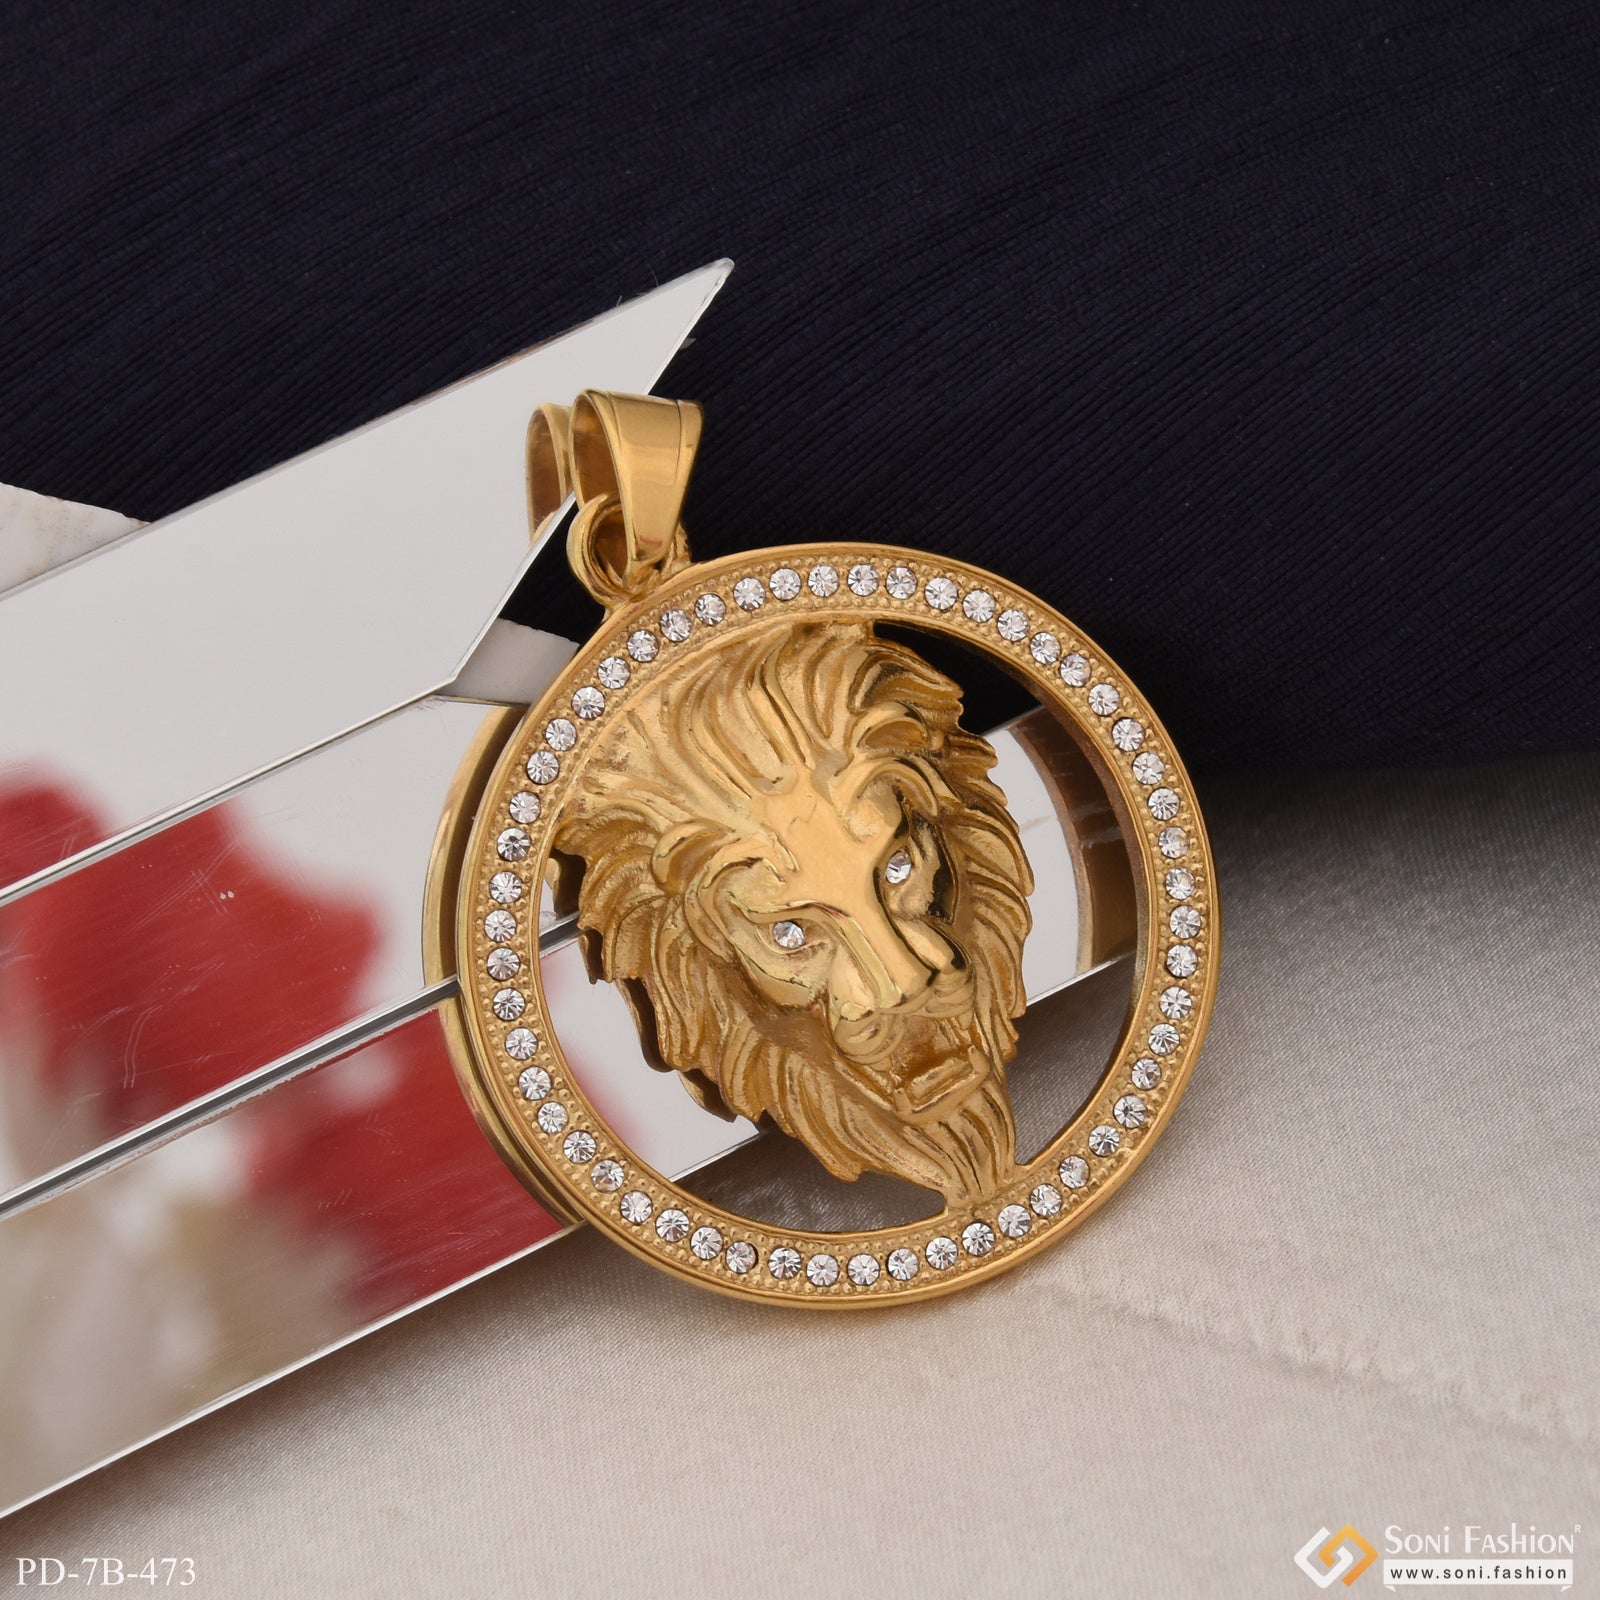 Lion with Diamond Superior Quality High-Class Design Pendant for Men - Style B473